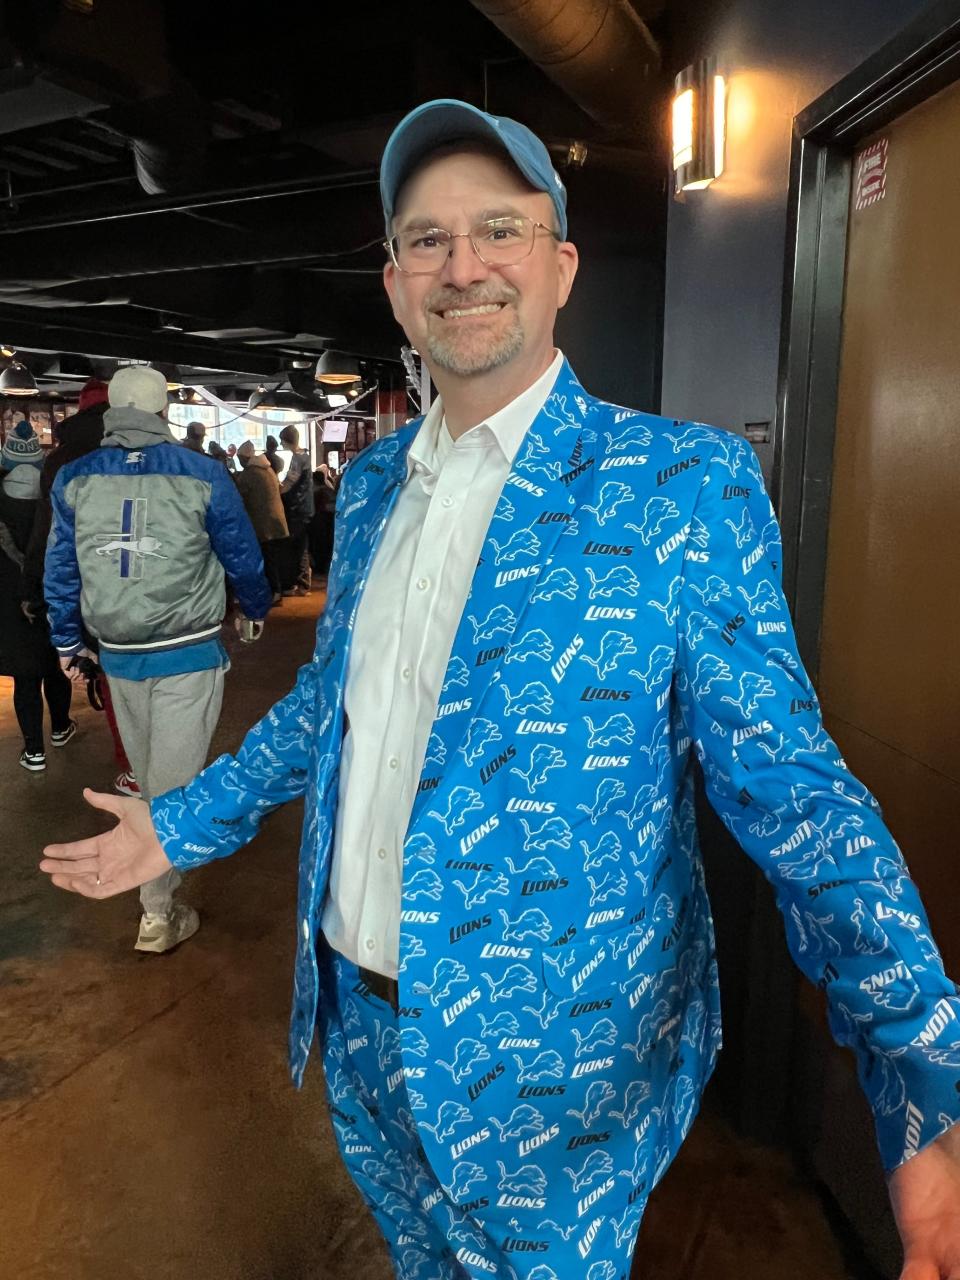 David Hauer, of Cleveland, poses for a photo at a fan event inside Comerica Park on Sunday, Jan. 21, 2024, before the Detroit Lions face the Tampa Bay Buccaneers. Hauer, who grew up in Eastpointe, said he was feeling a bit nervous ahead of kickoff, but thought the Lions would pull through.